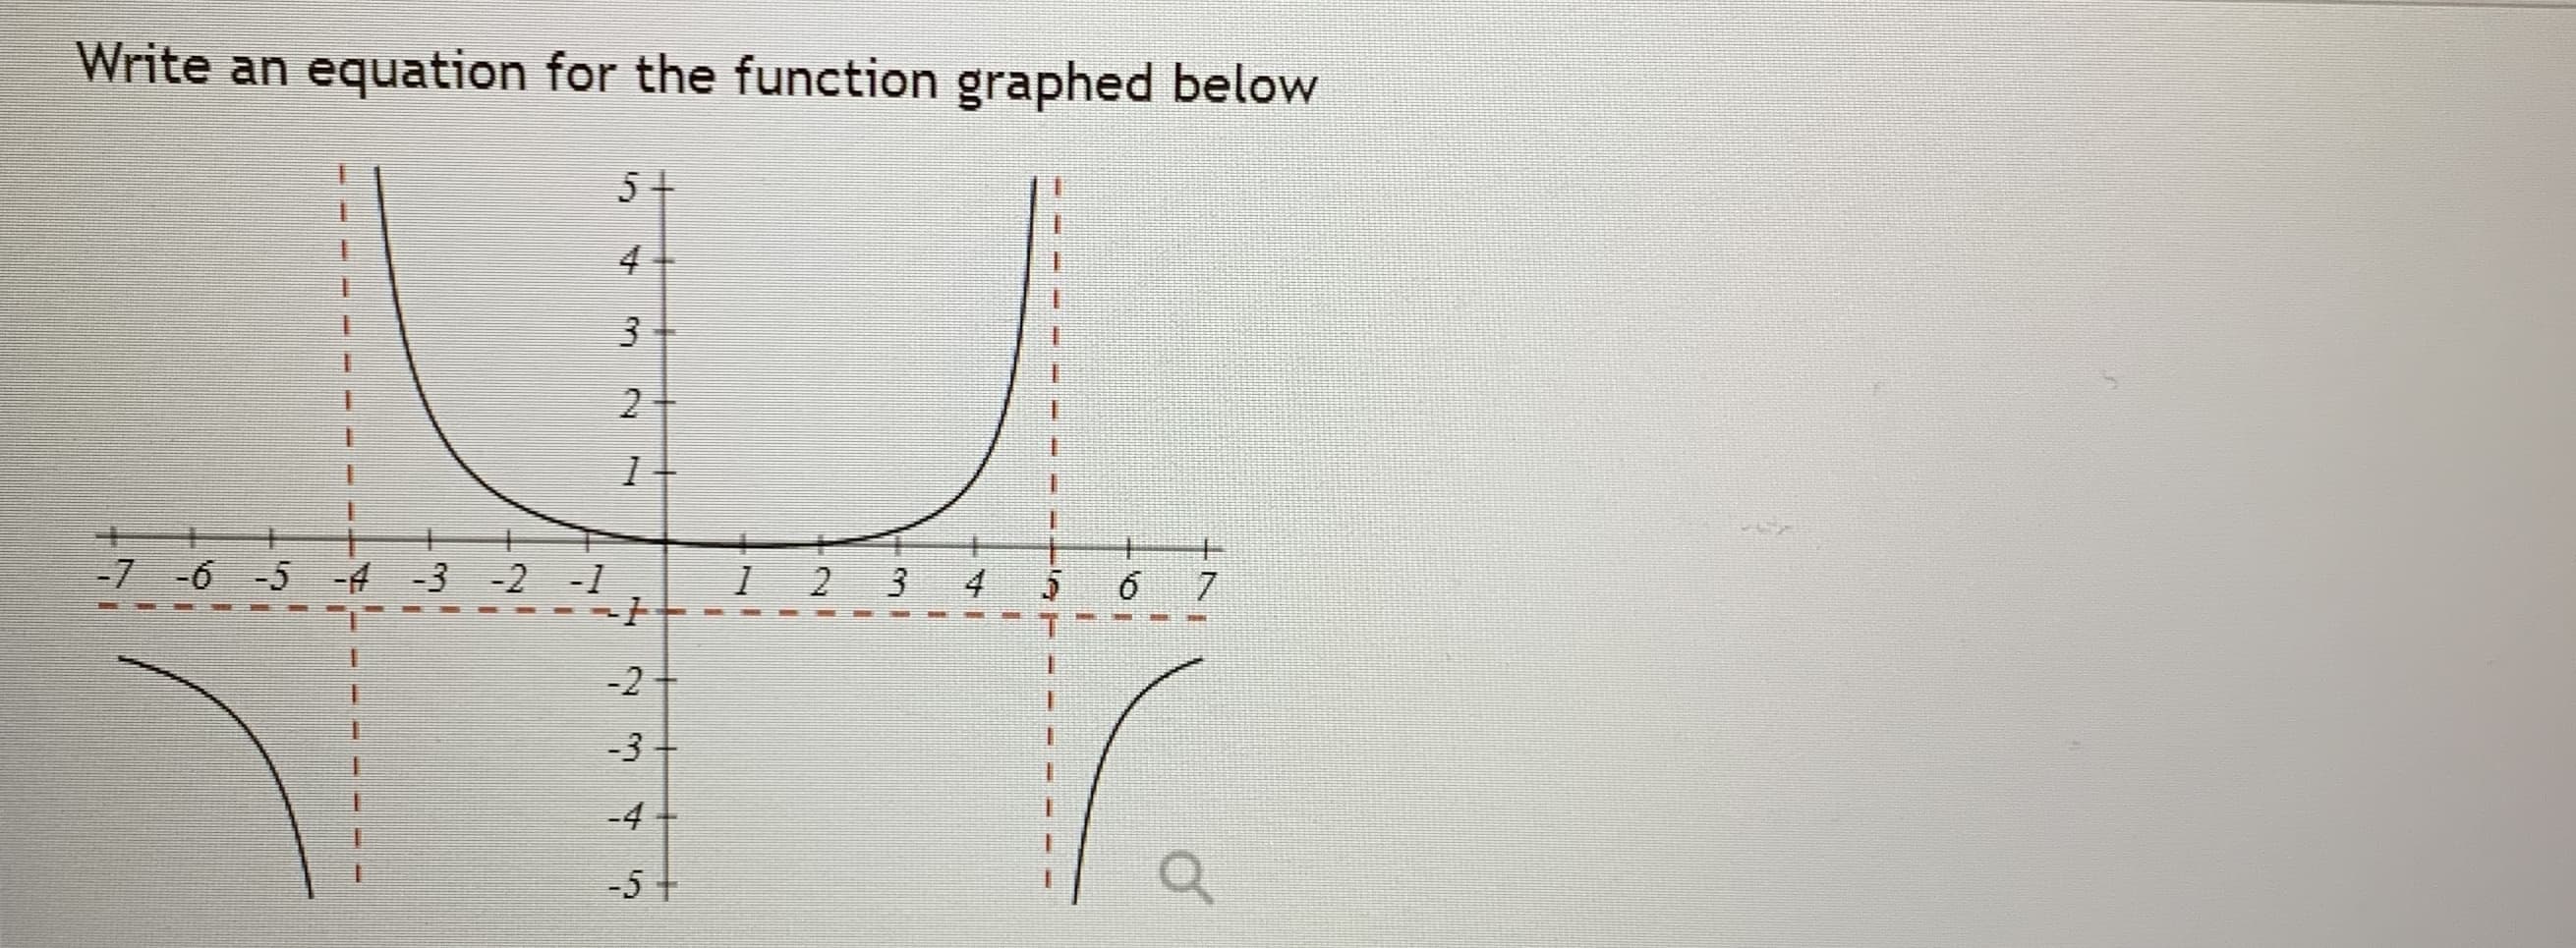 Write an equation for the function graphed below
5+
4
-7 -6 -5 -4 -3 -2 -1
2 3
4
7.
-2+
-3+
-4
-5 +
3.
2.
